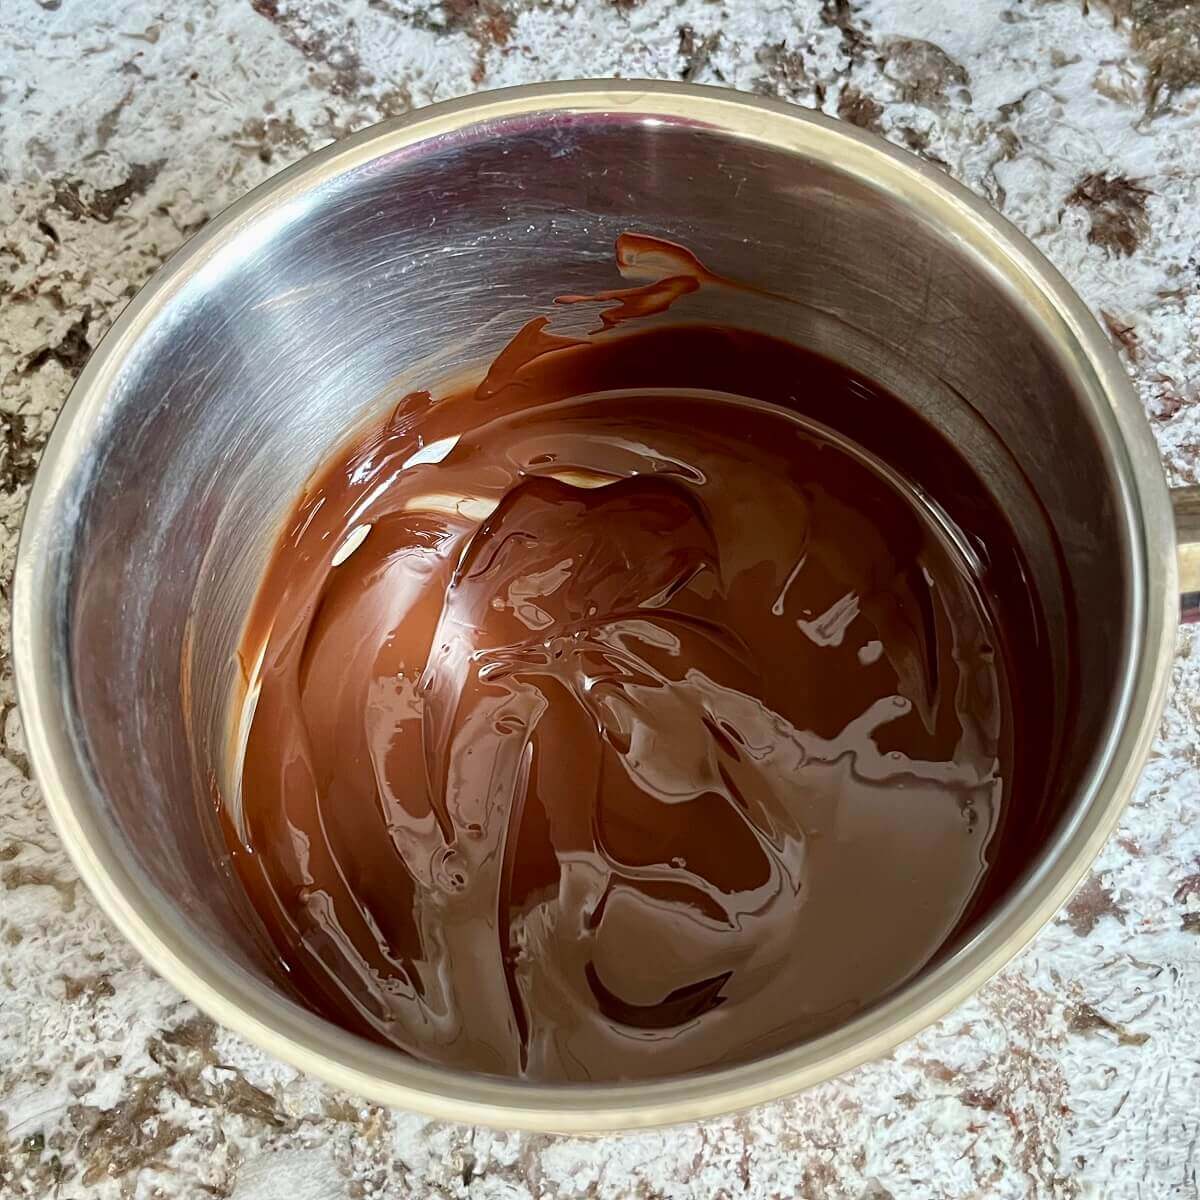 Melted dark chocolate in a steel pot.